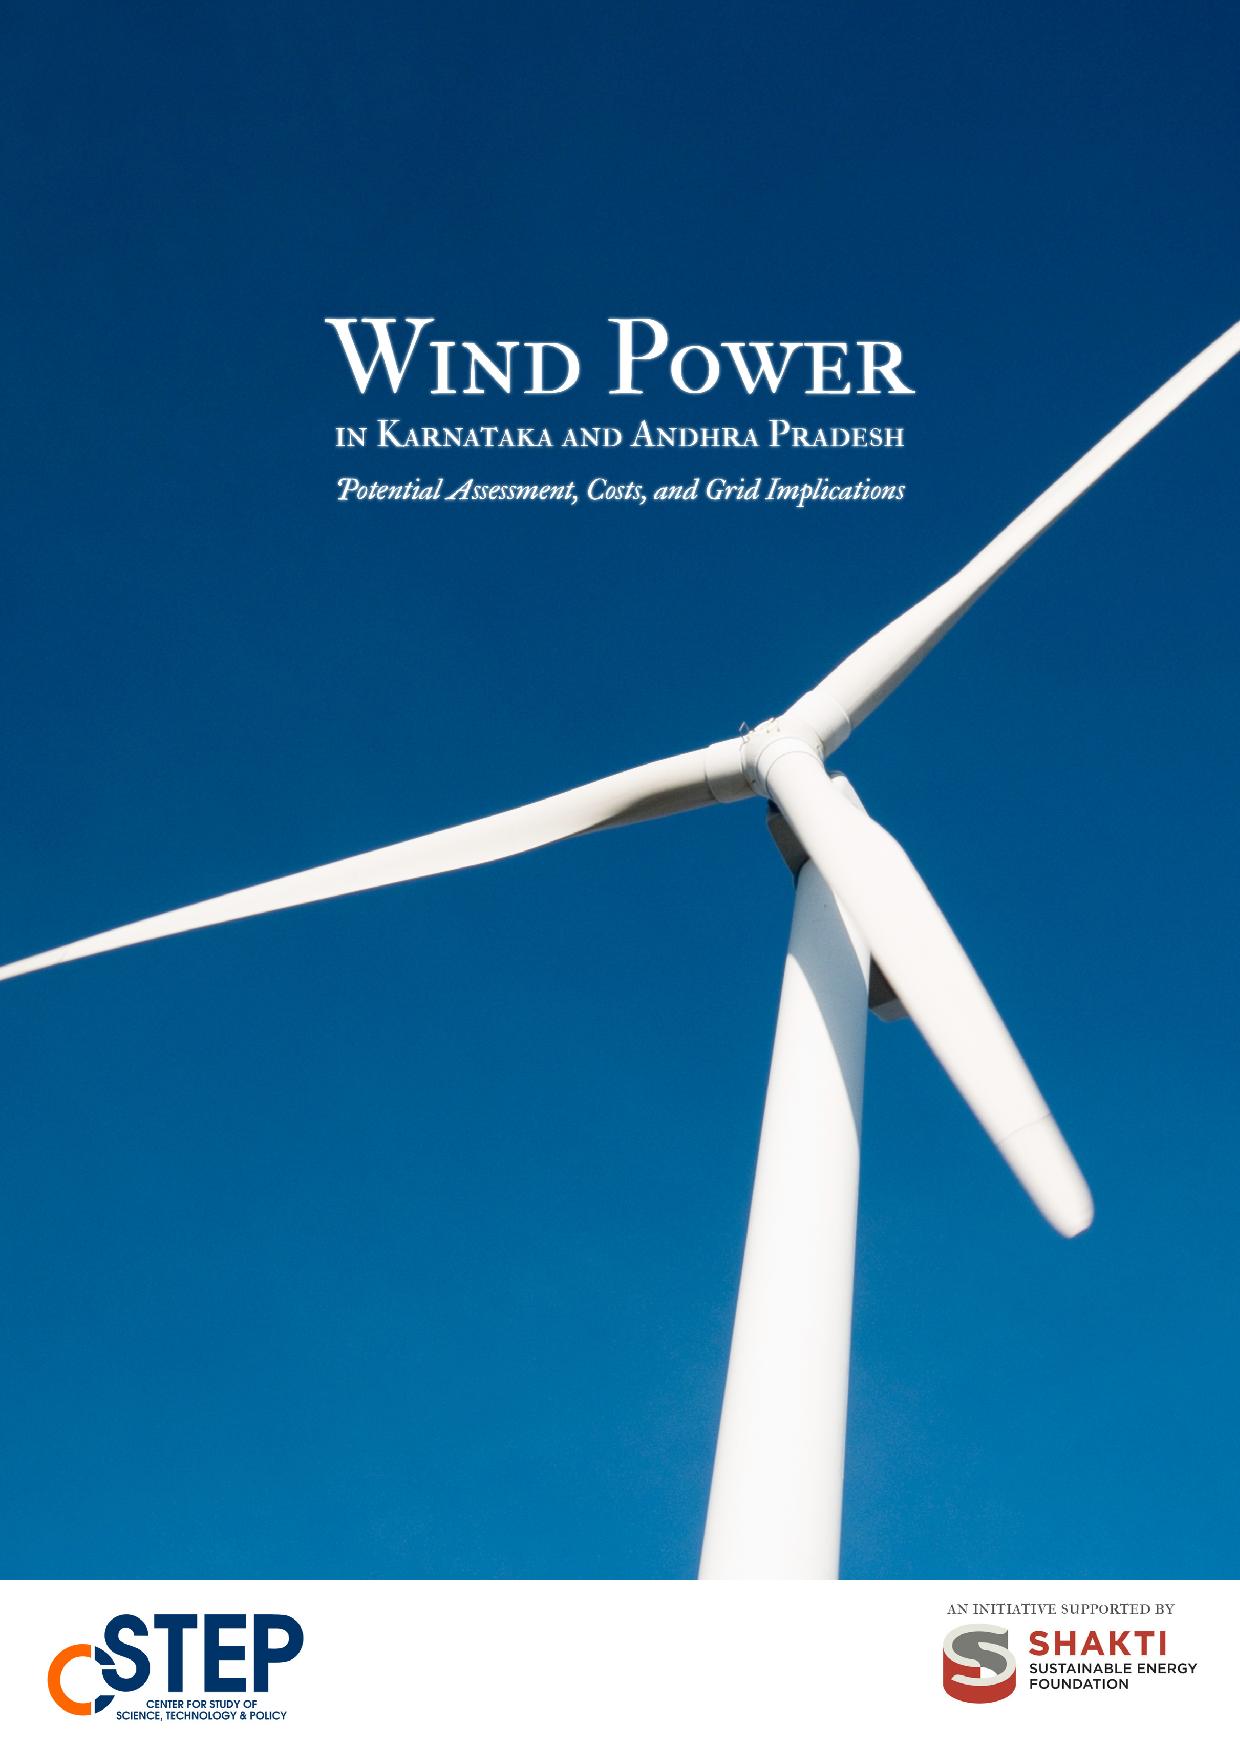 Wind Power in Karnataka and Andhra Pradesh - Potential Assessment, Costs, and Grid Implications